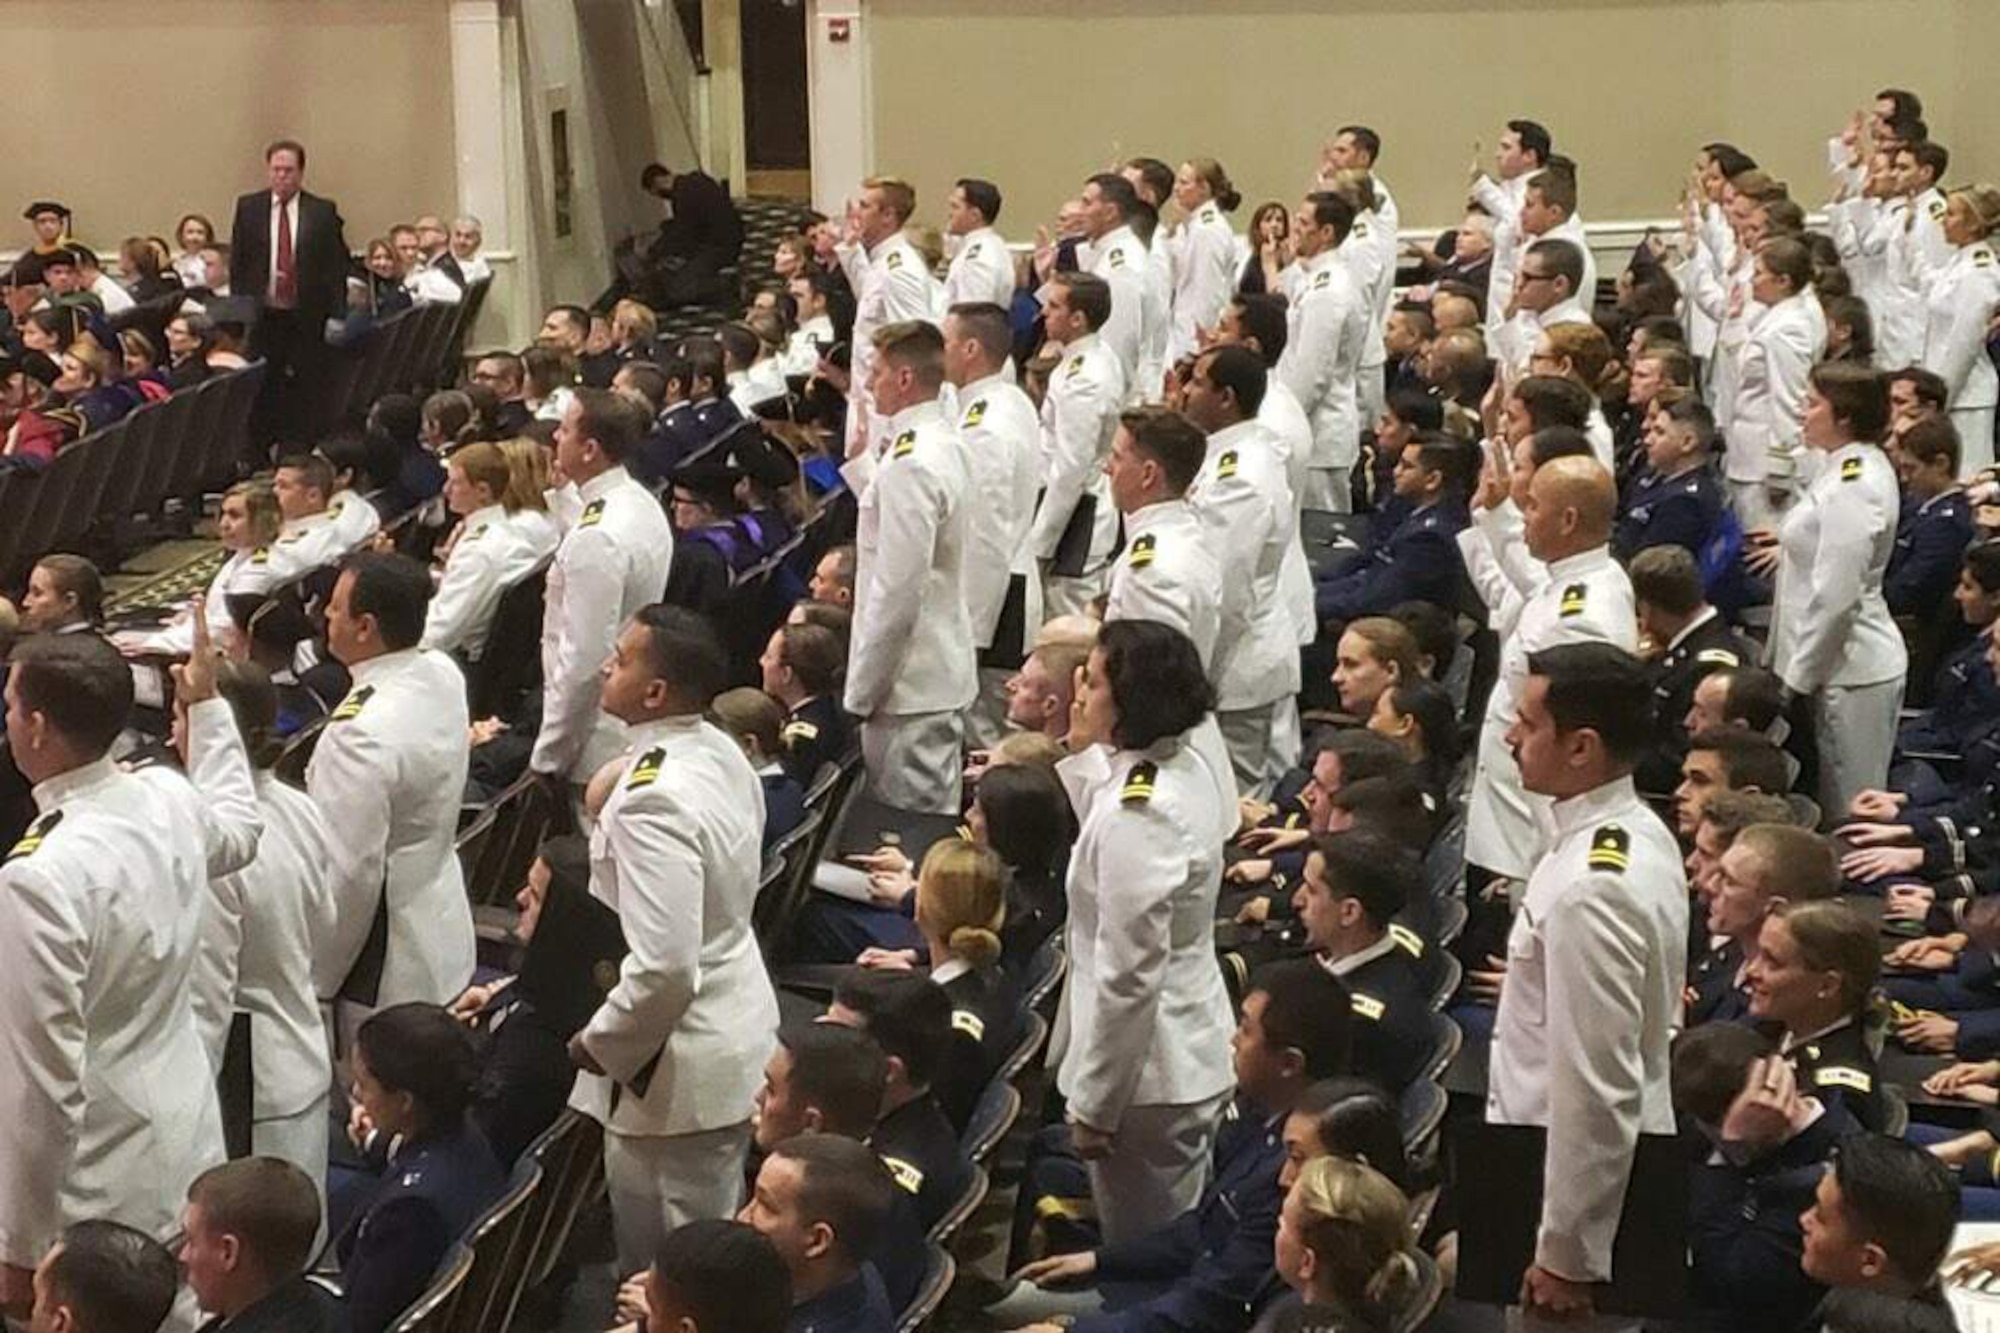 Service members stand at their seats in an auditorium and raise their right hands.